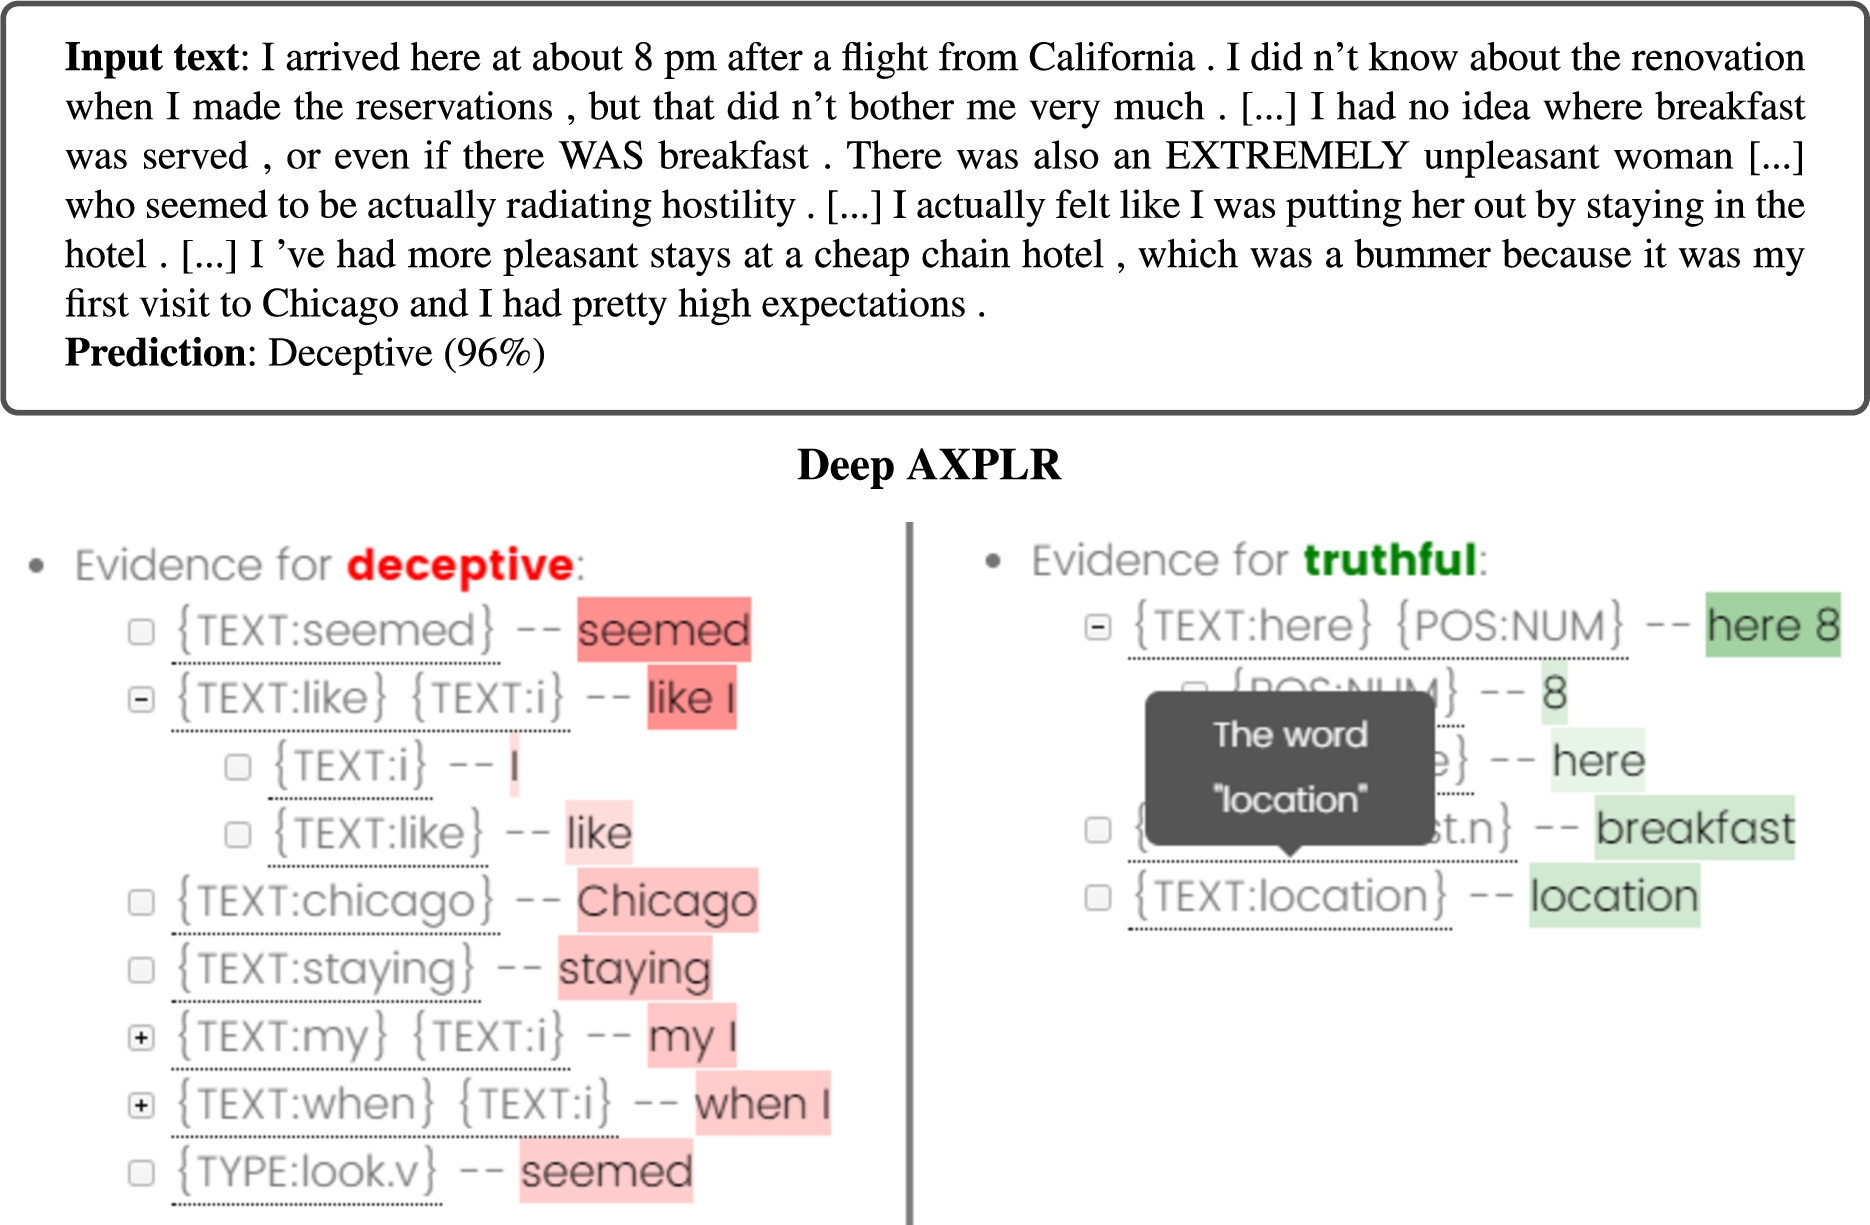 Example of deep AXPLR for deceptive review detection. The partial input text and the model prediction are shown in the top-most box. The deep AXPLR shows evidence for both the deceptive class and the truthful class. A user can expand some patterns/arguments to see their sub-patterns (i.e., their attackers and/or supporters) such as, on the left, [[TEXT:i]] and [[TEXT:like]] supporting [[TEXT:like], [TEXT:i]]. The meaning of each pattern is provided as a tooltip. The color and its intensity represent the supported class and the strengths of the arguments, respectively.